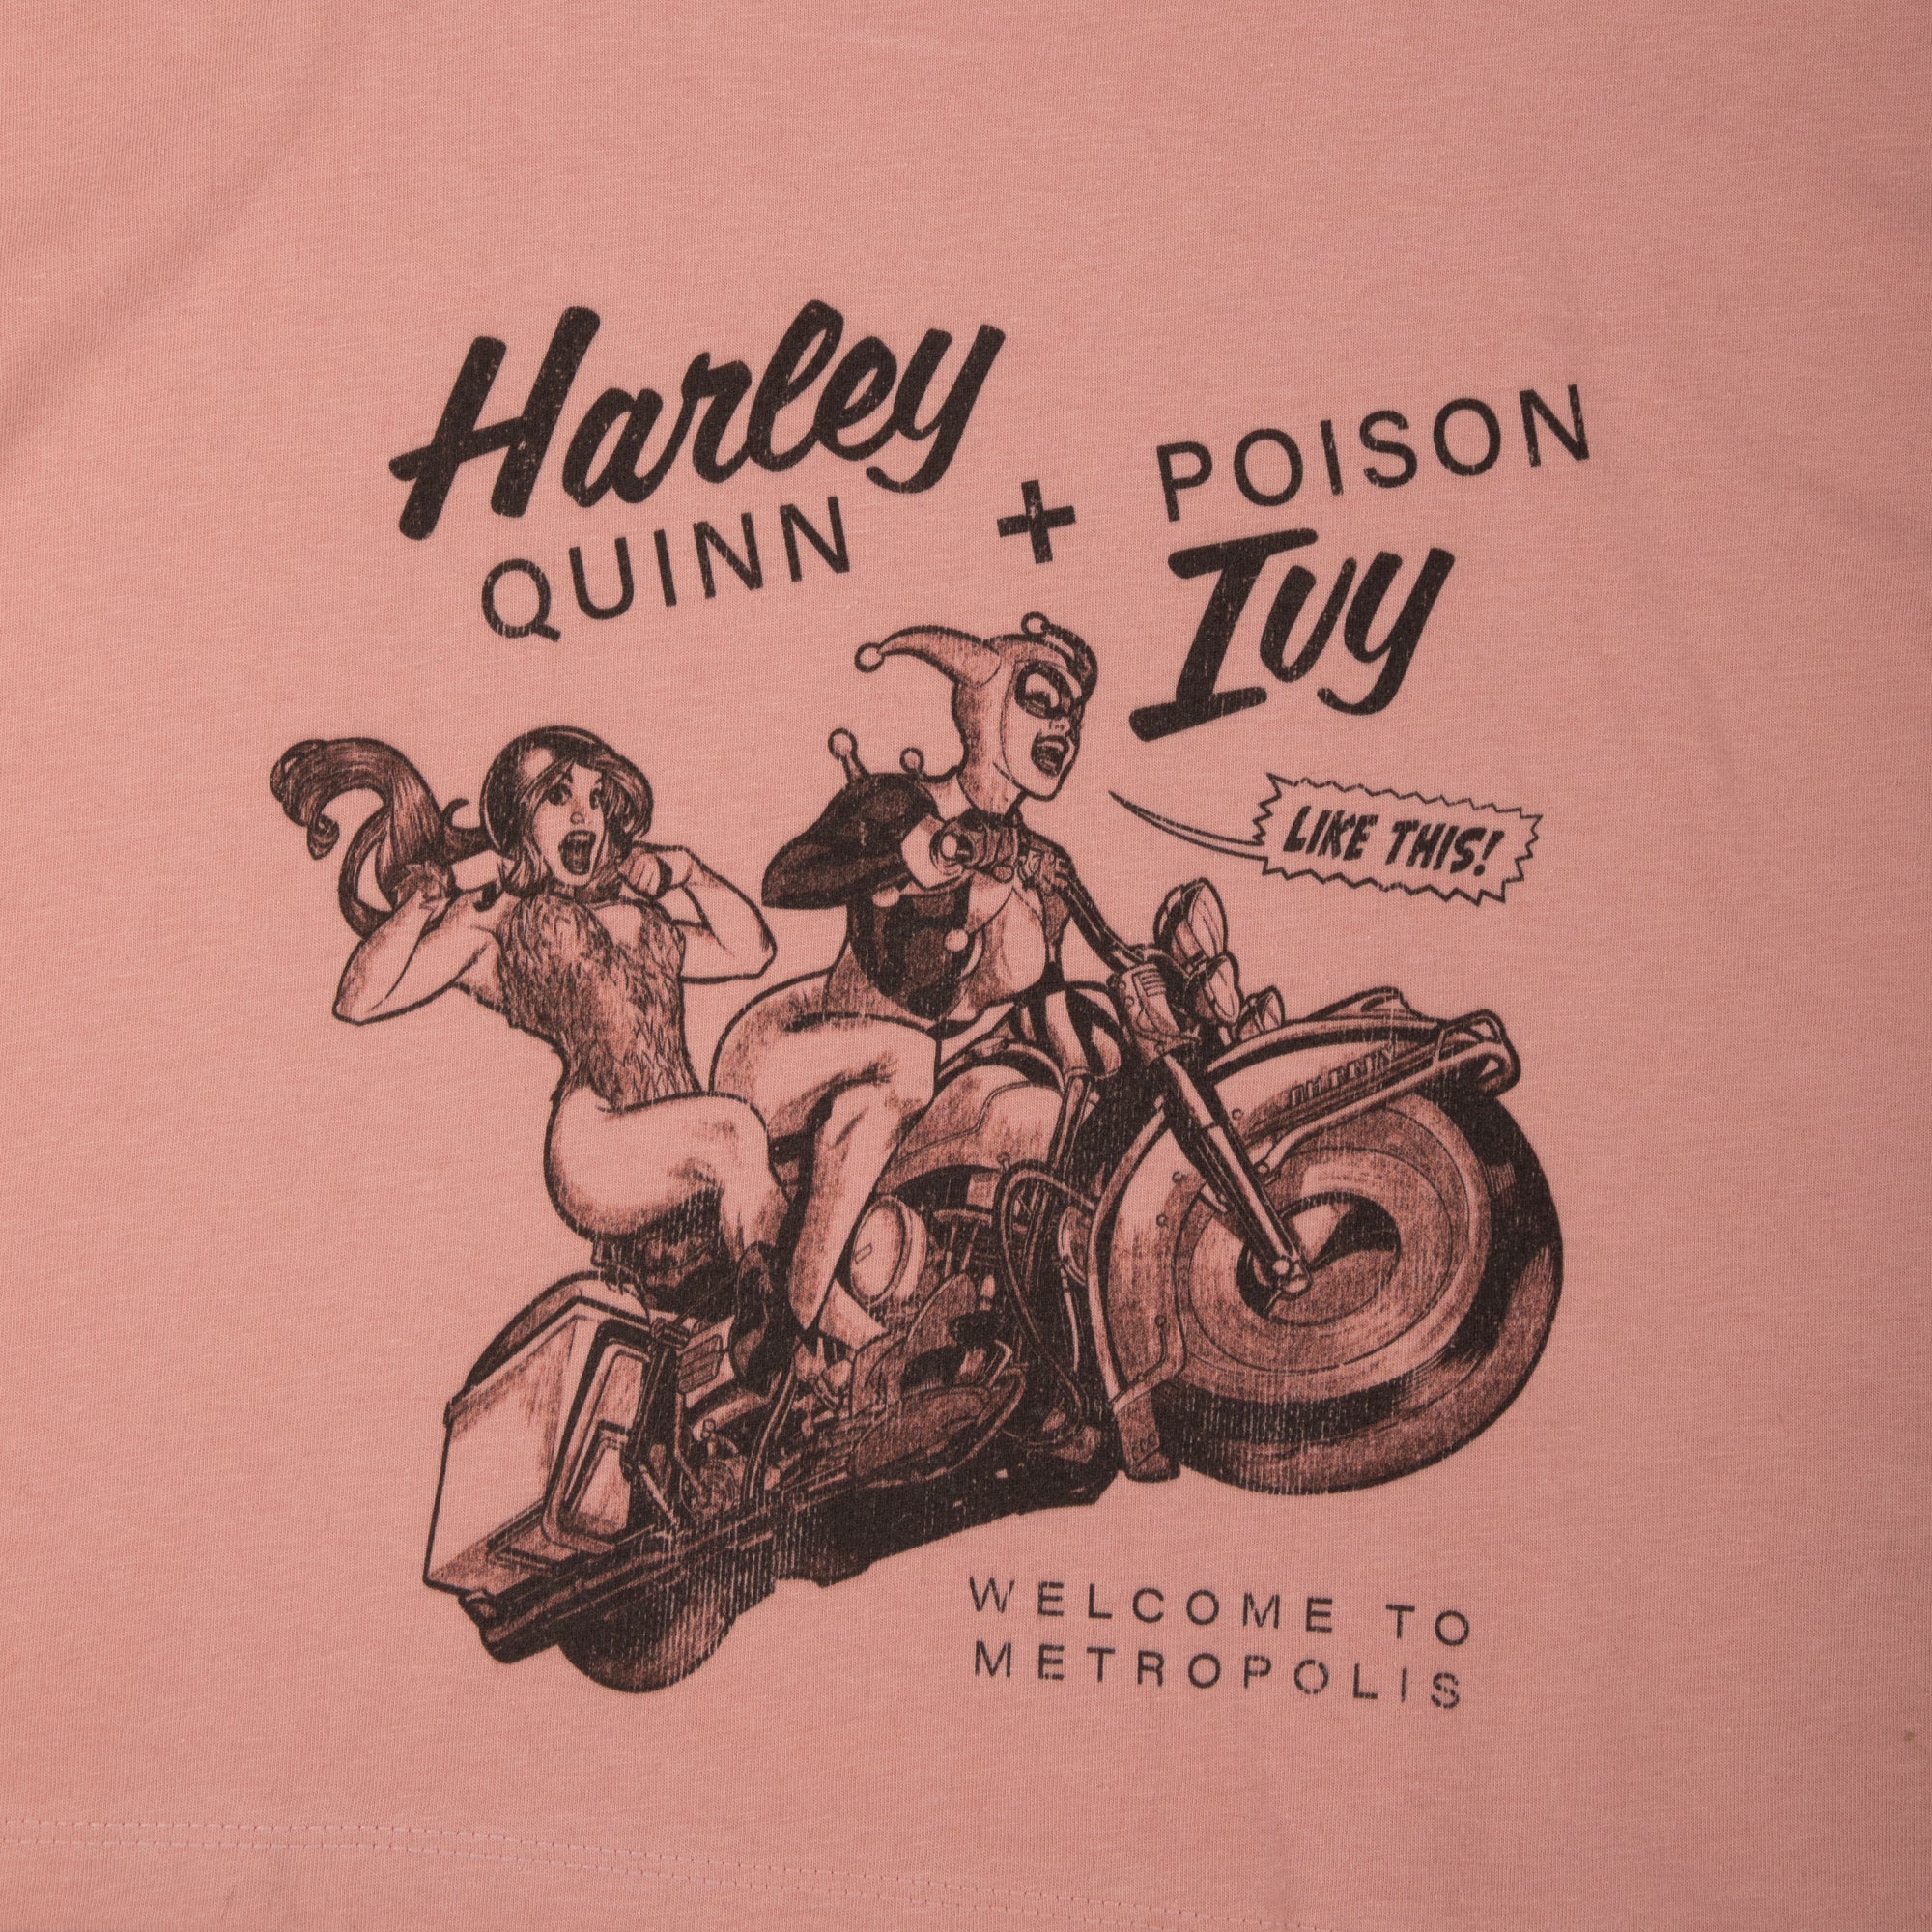 Vintage Harley Quinn & Poison Ivy Cropped Pink Tee